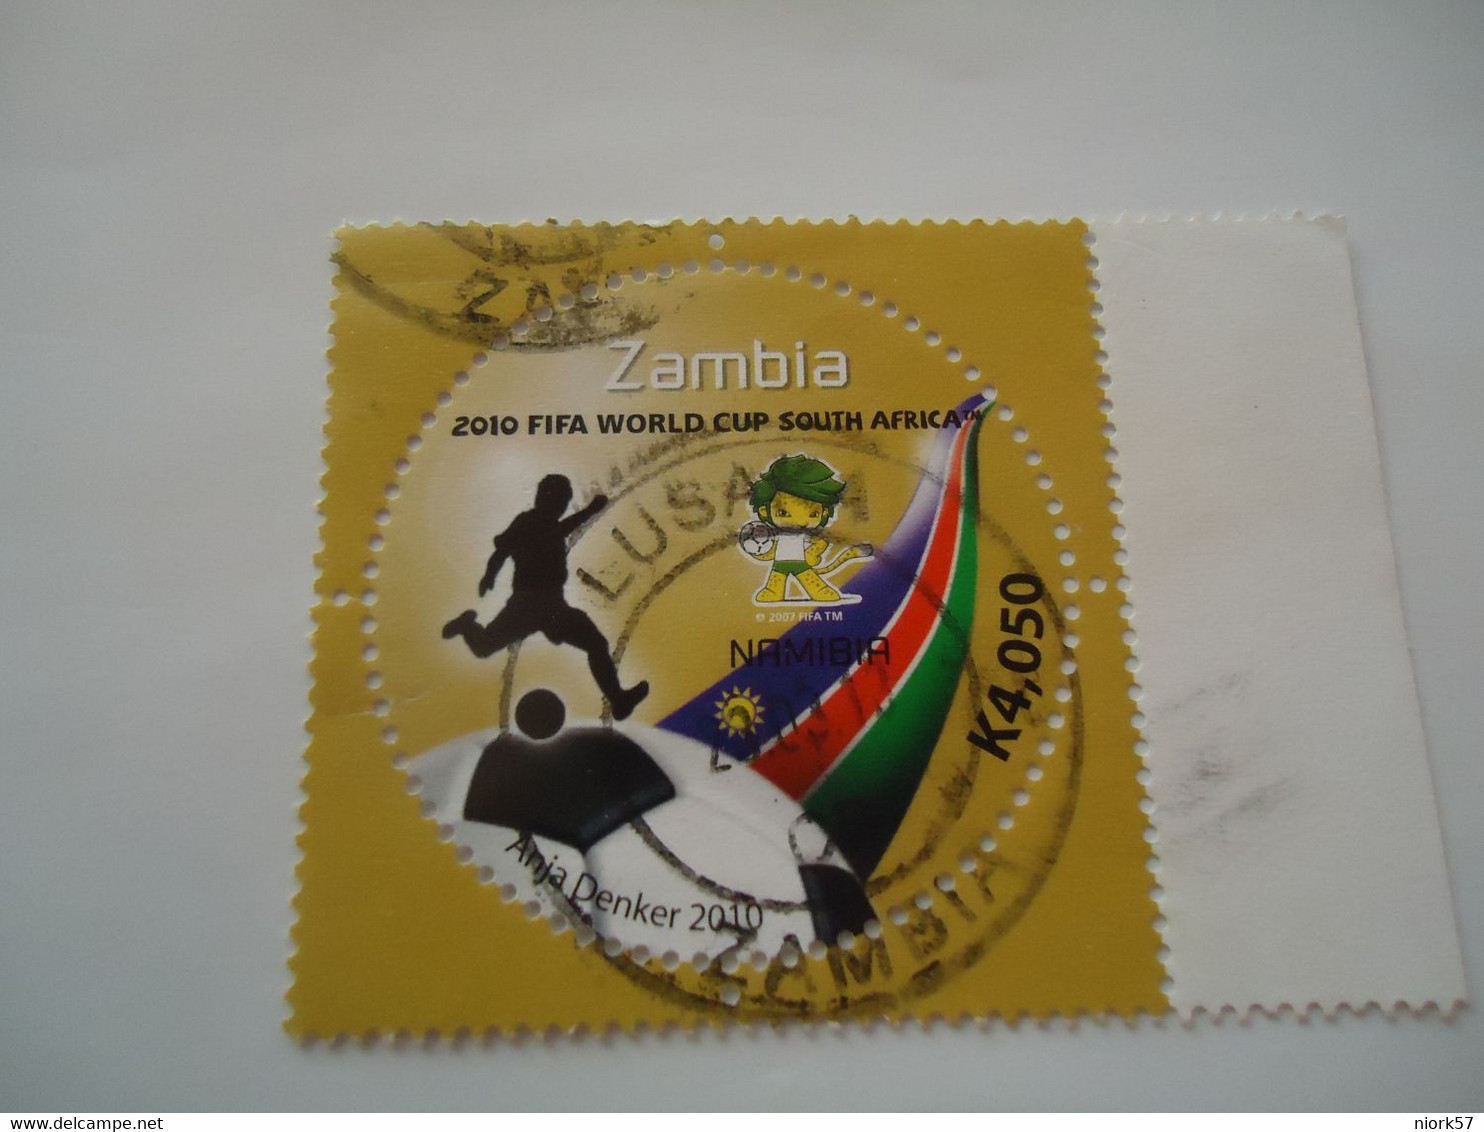 ZAMBIA   USED STAMPS   FOOTBALL WORLD CUP 2010  FIFA  WITH POSTMARK   LUSAKA - 2010 – South Africa